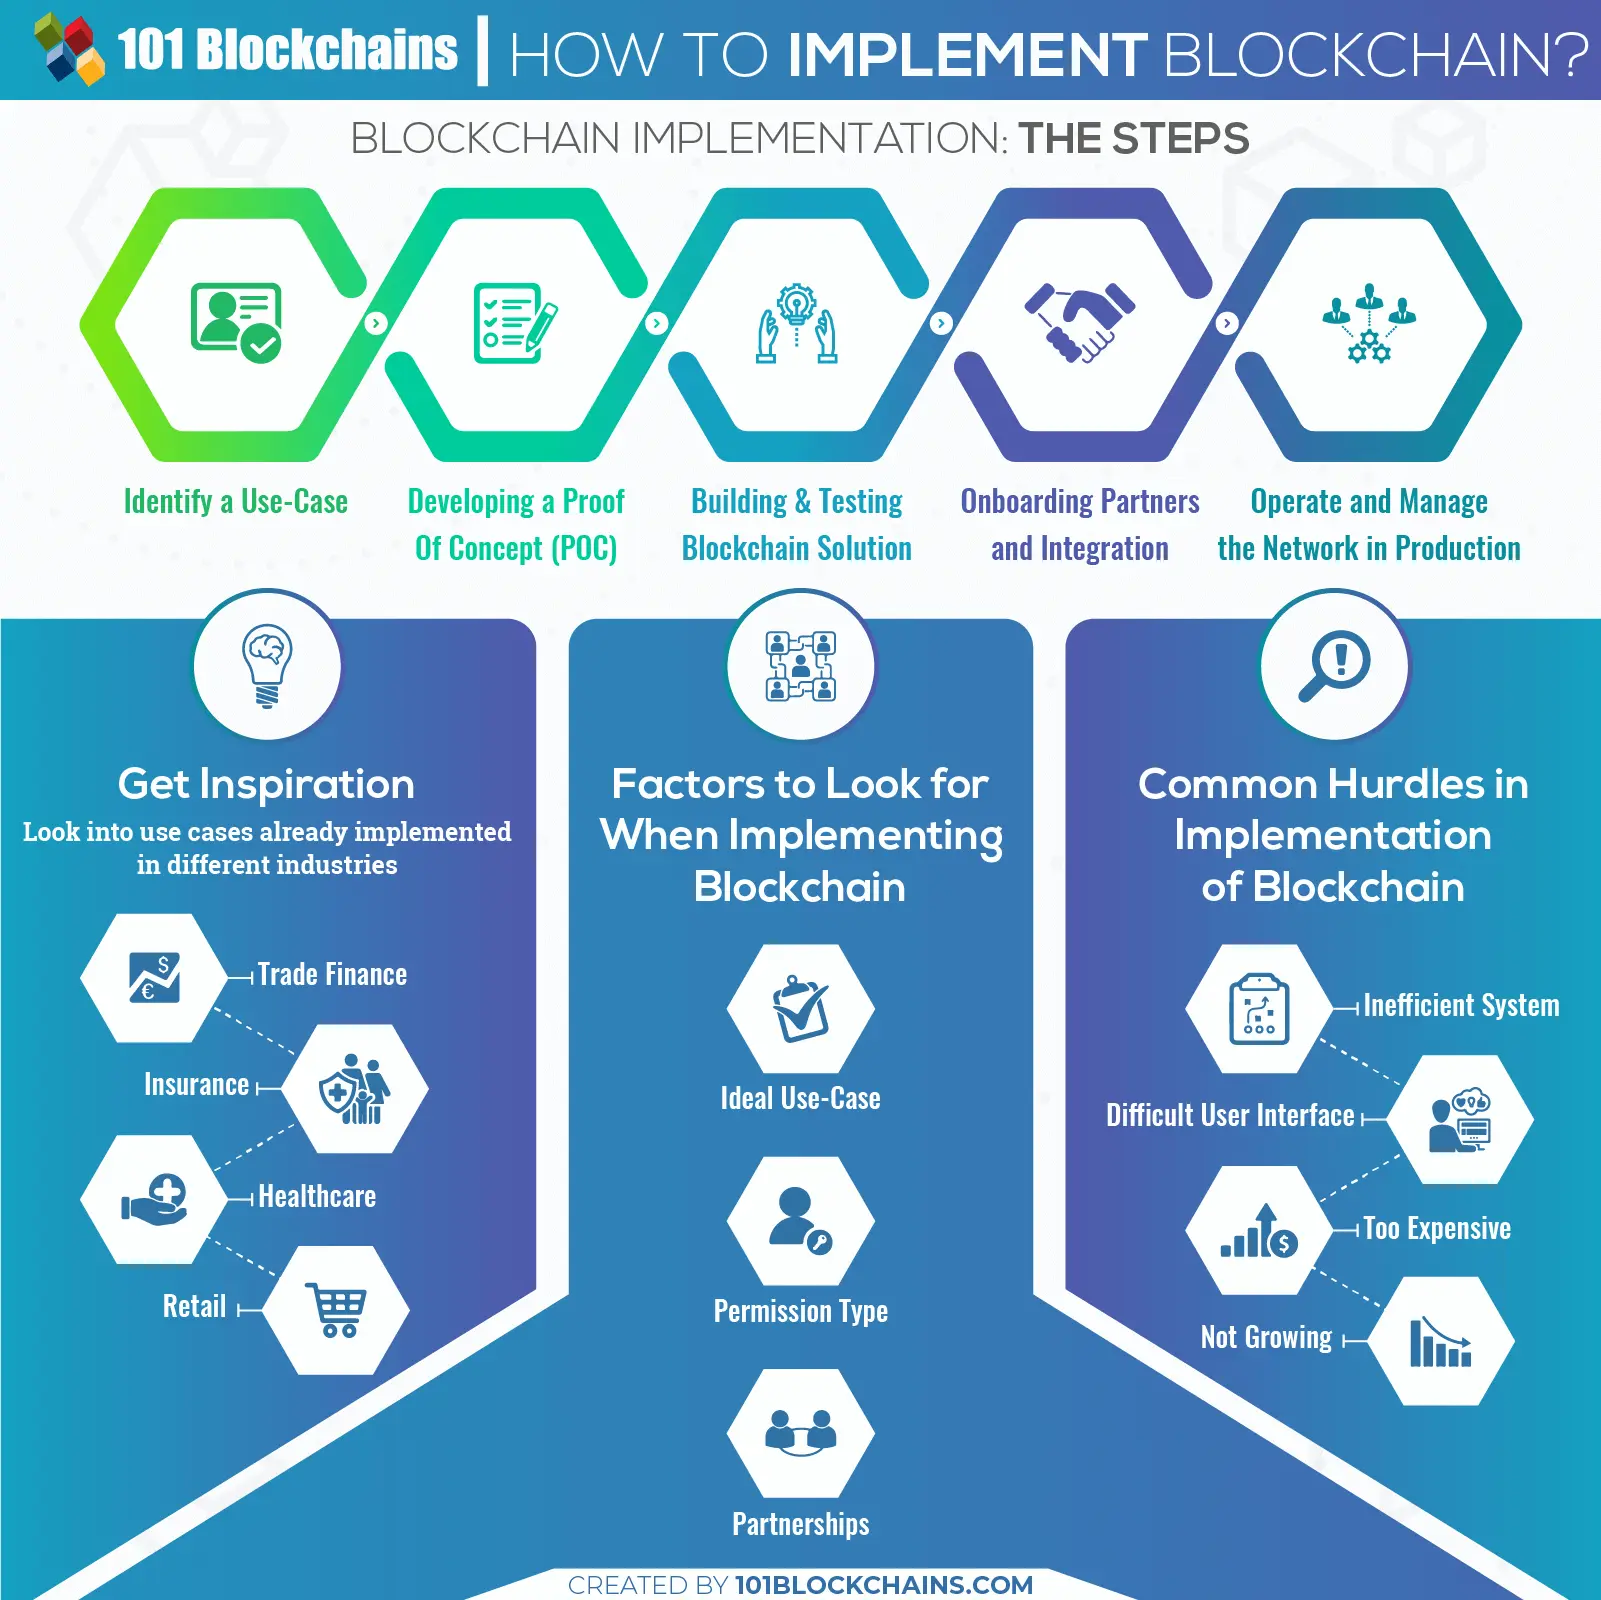 How to Implement Blockchain